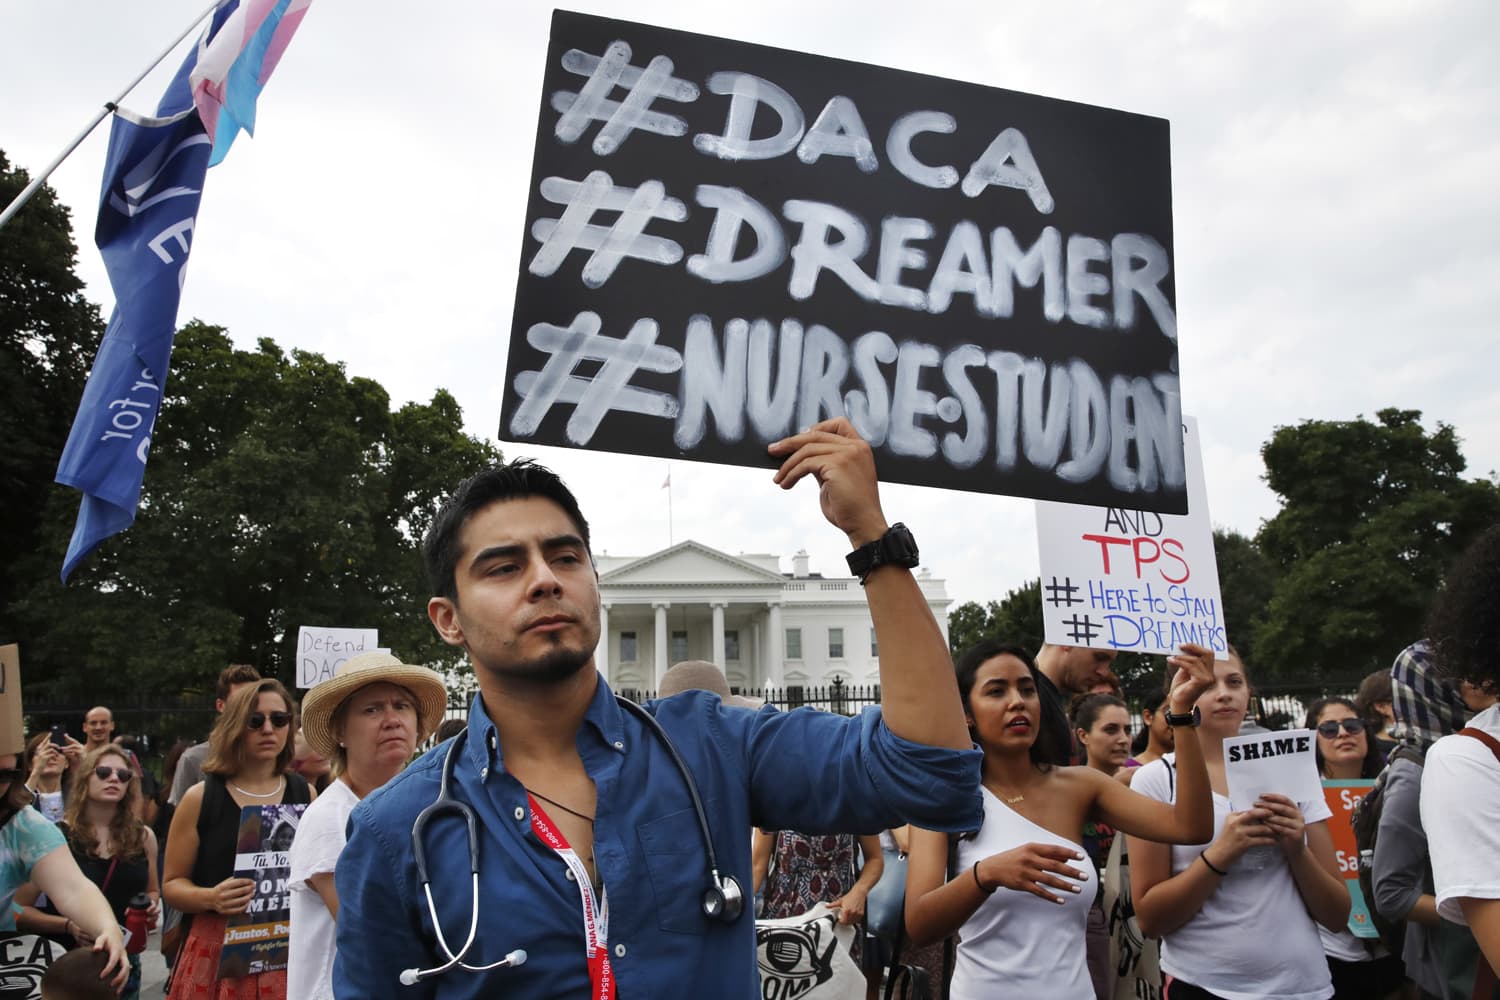 Carlos Esteban, 31, of Woodbridge, Va., a nursing student and recipient of Deferred Action for Childhood Arrivals, known as DACA, rallies with others in support of DACA outside of the White House, in Washington on Sept. 5. (Jacquelyn Martin/AP)